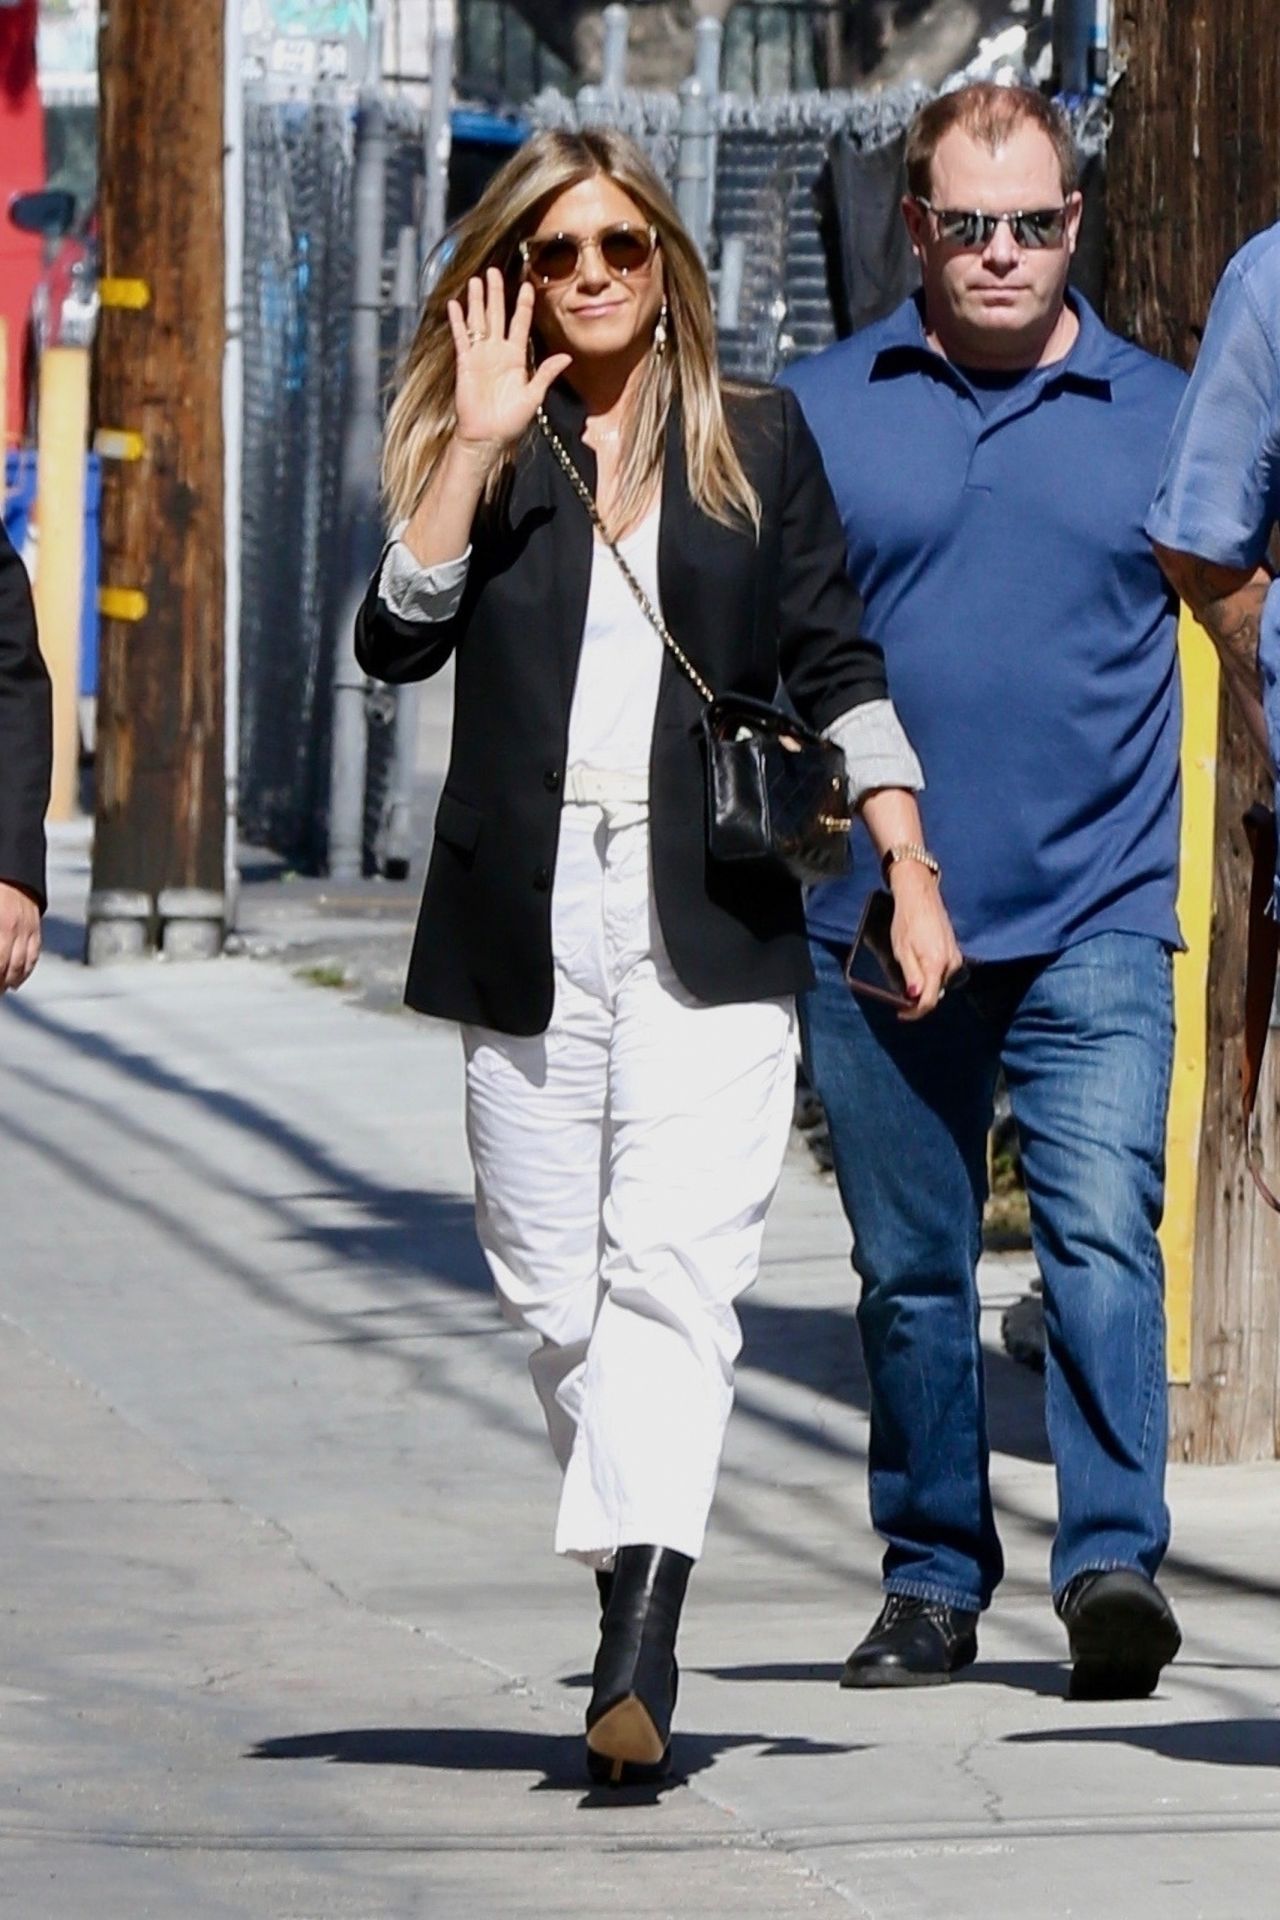 jennifer-aniston-arriving-to-appear-on-jimmy-kimmel-live-in-hollywood-05-29-2019-1.jpg